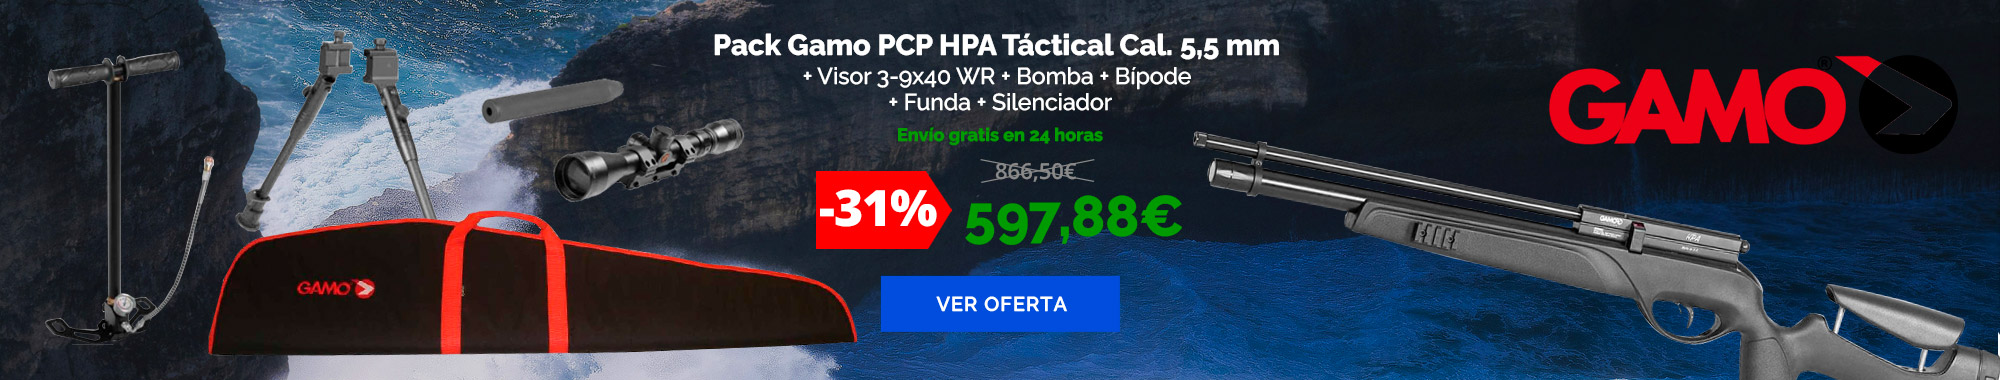 -31% Pack Gamo PCP HPA